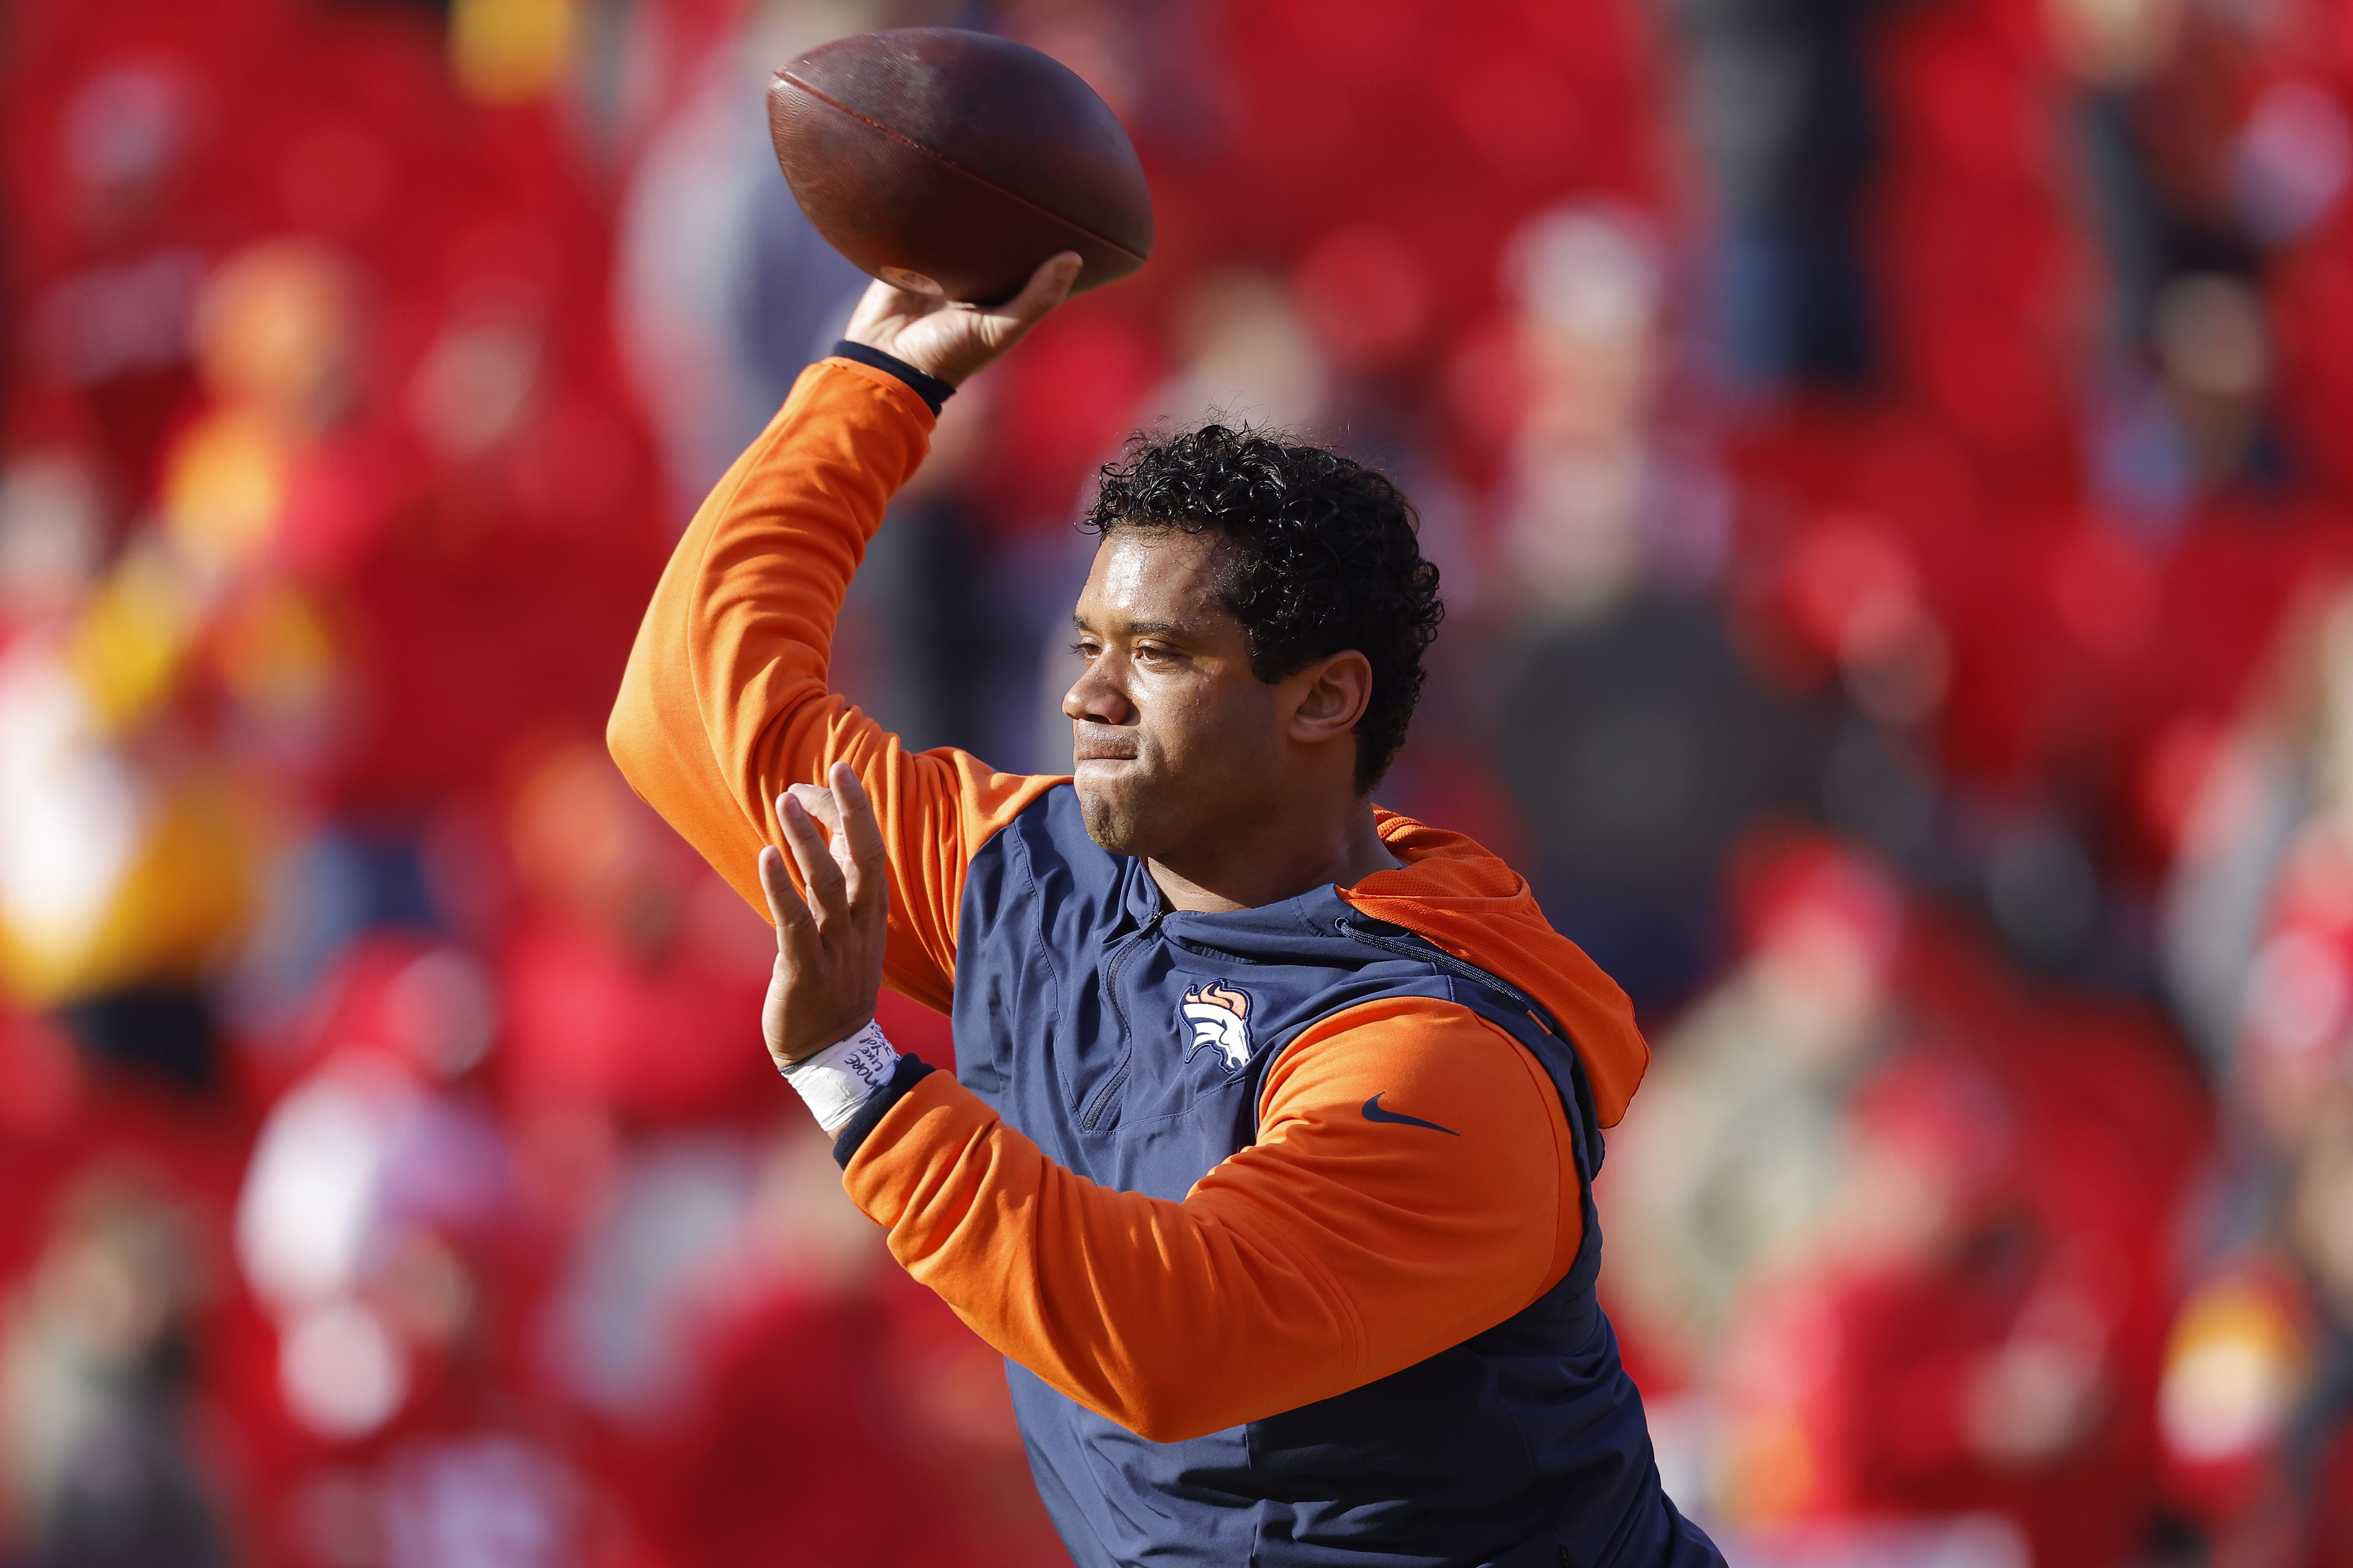 russell wilson in broncos jersey